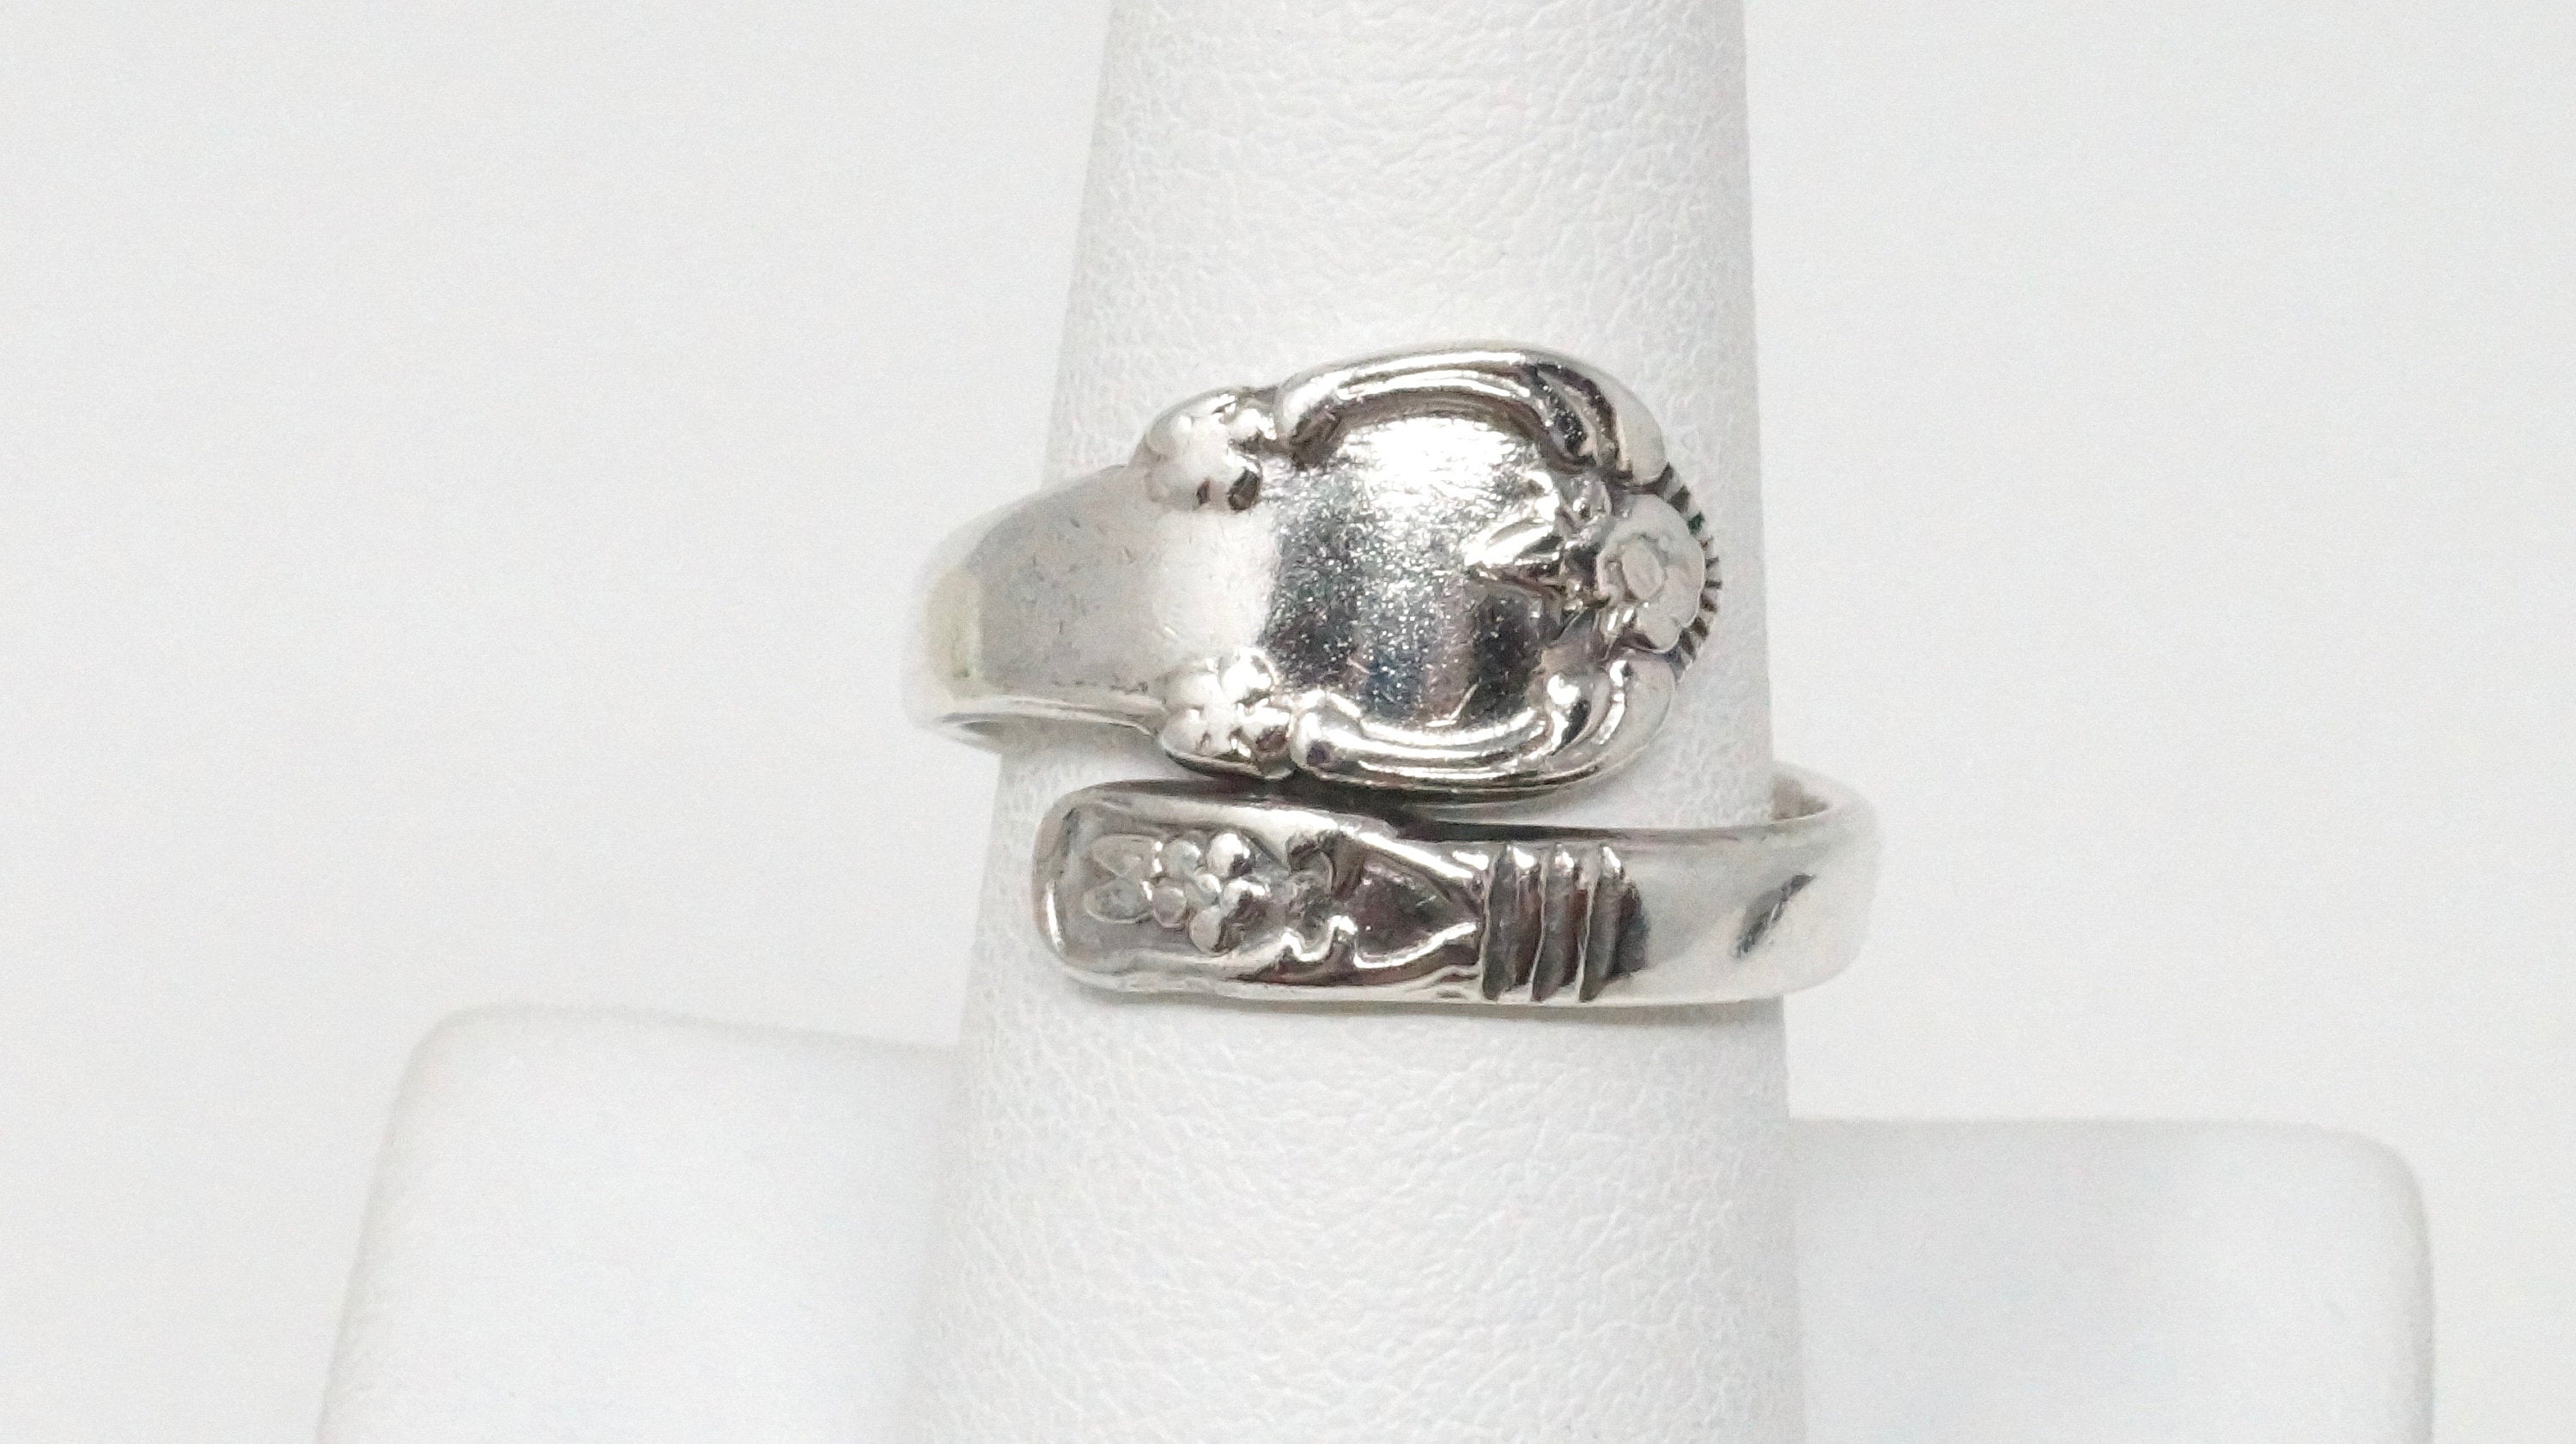 Antique Art Deco Flower Floral Sterling Silver Wrap Spoon Ring - Size 8.5